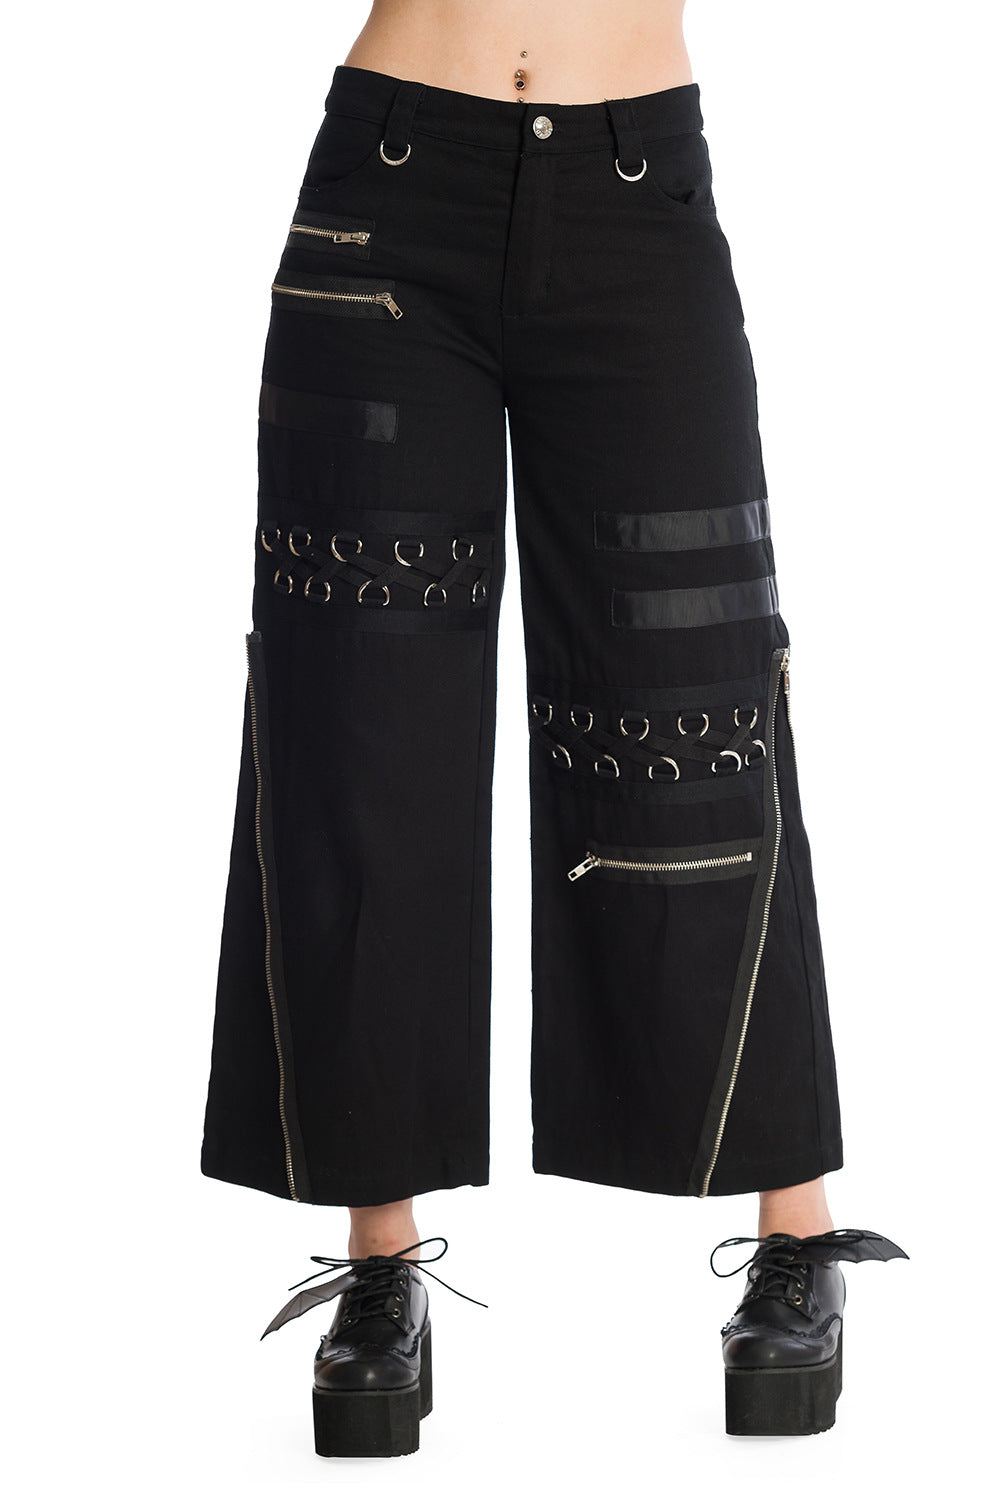 Baggy black trousers with zip and buckle features 